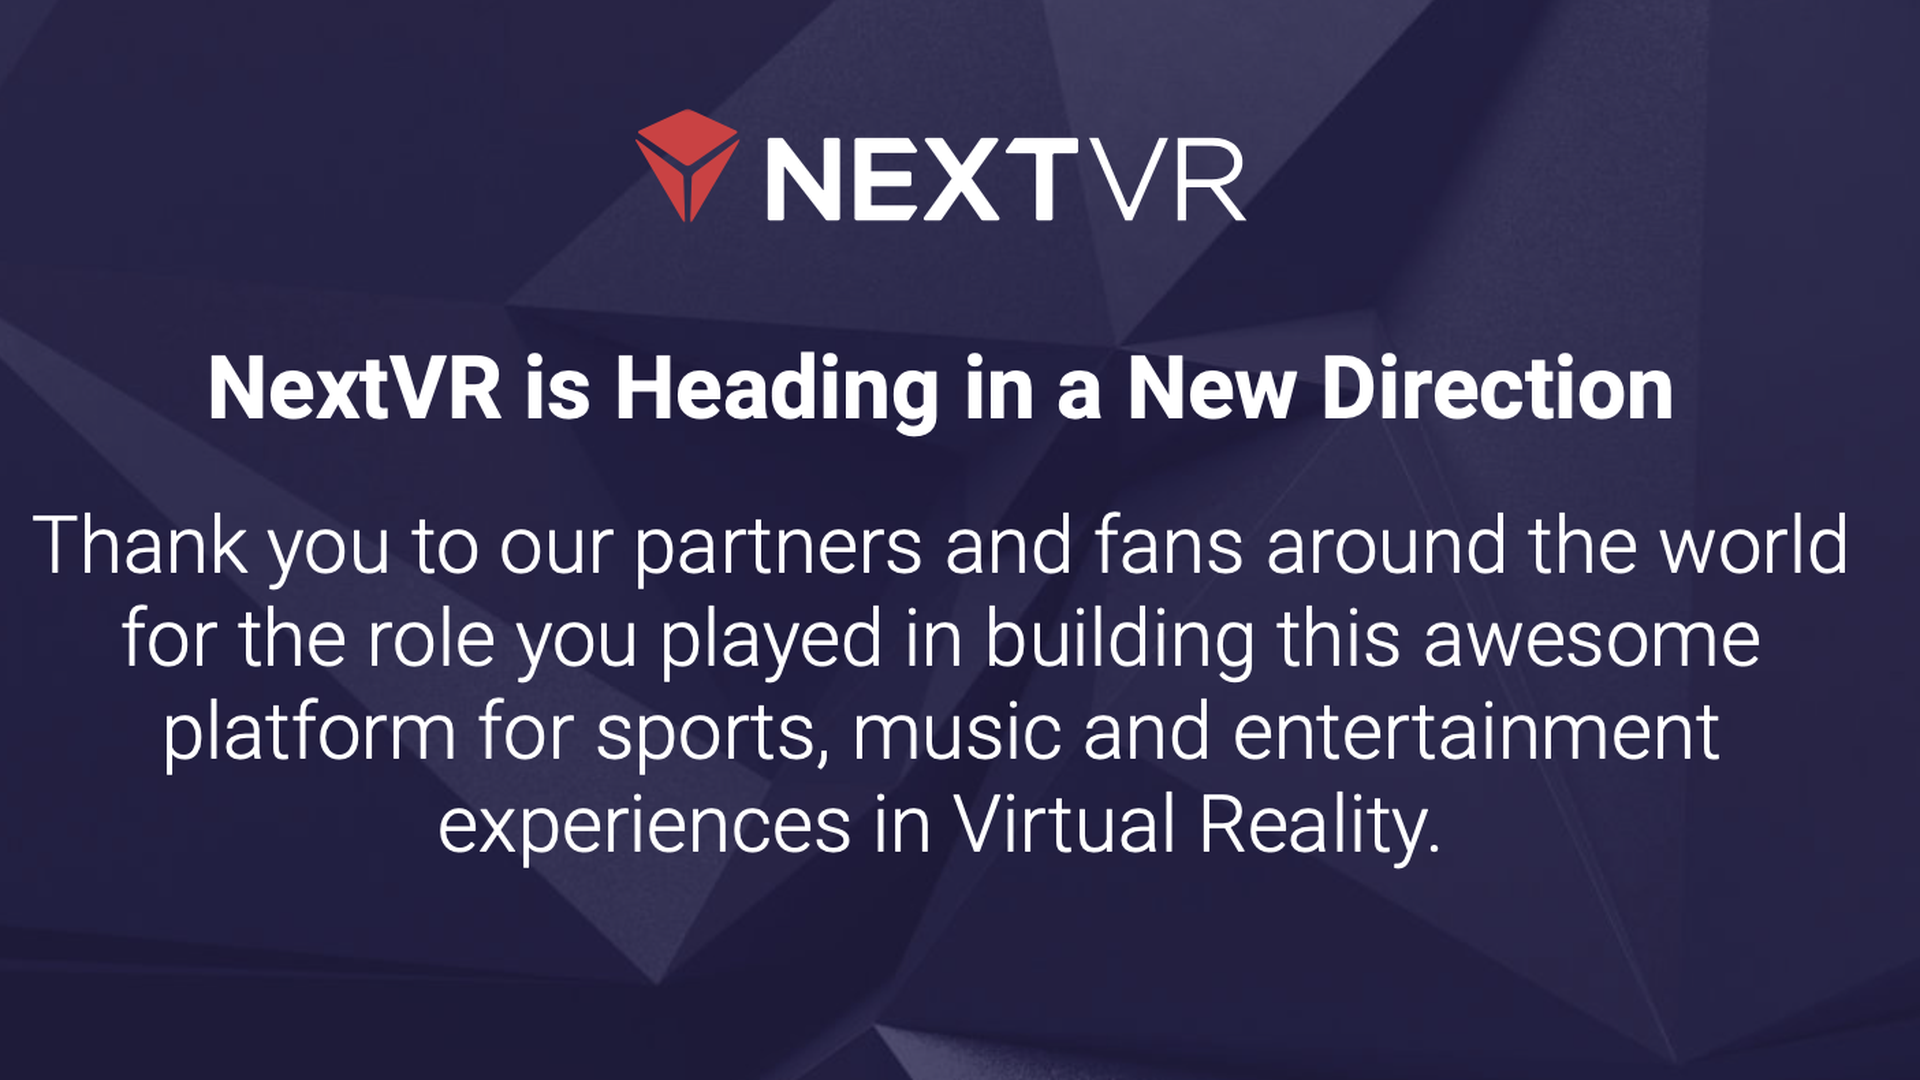 A statement on NextVR's website indicating it is headed in a new direction.